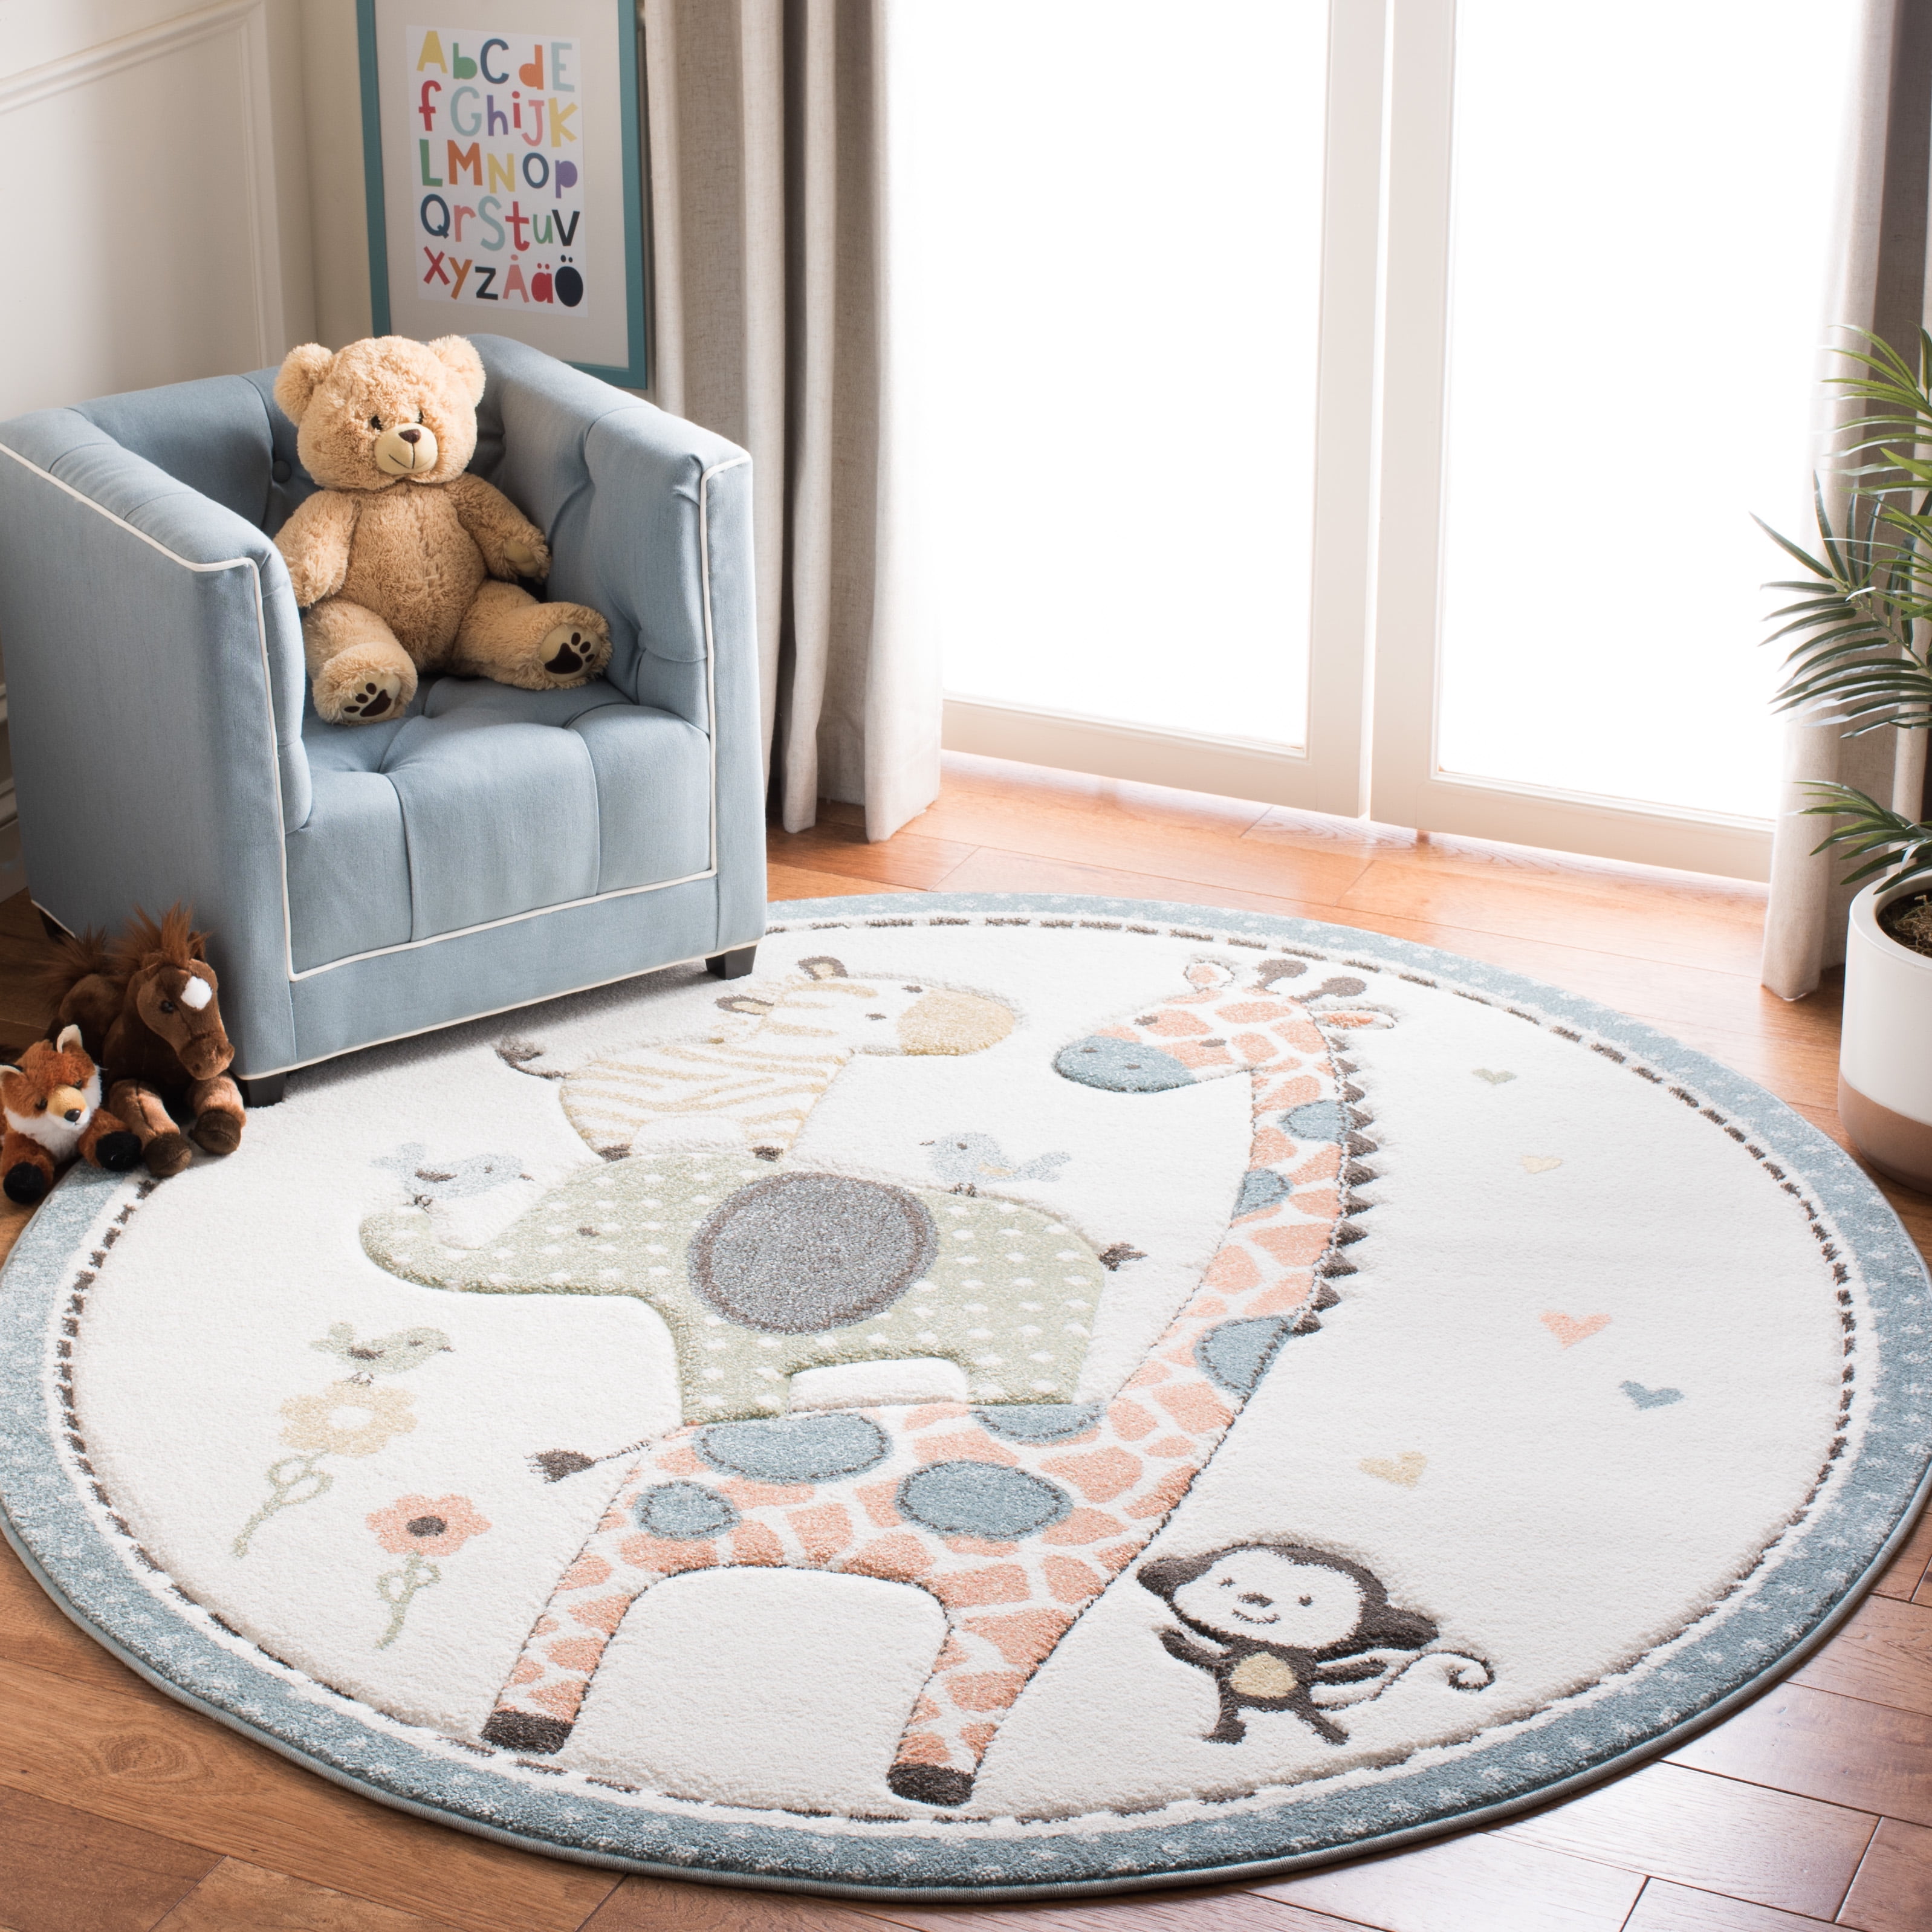 36.2 Inch Large Round Soft Area Rugs Cute Dinosaurs Pattern Nursery Playmat Rug Mat for Kids Playing Room Bedroom Living Room Home Decorative Rug